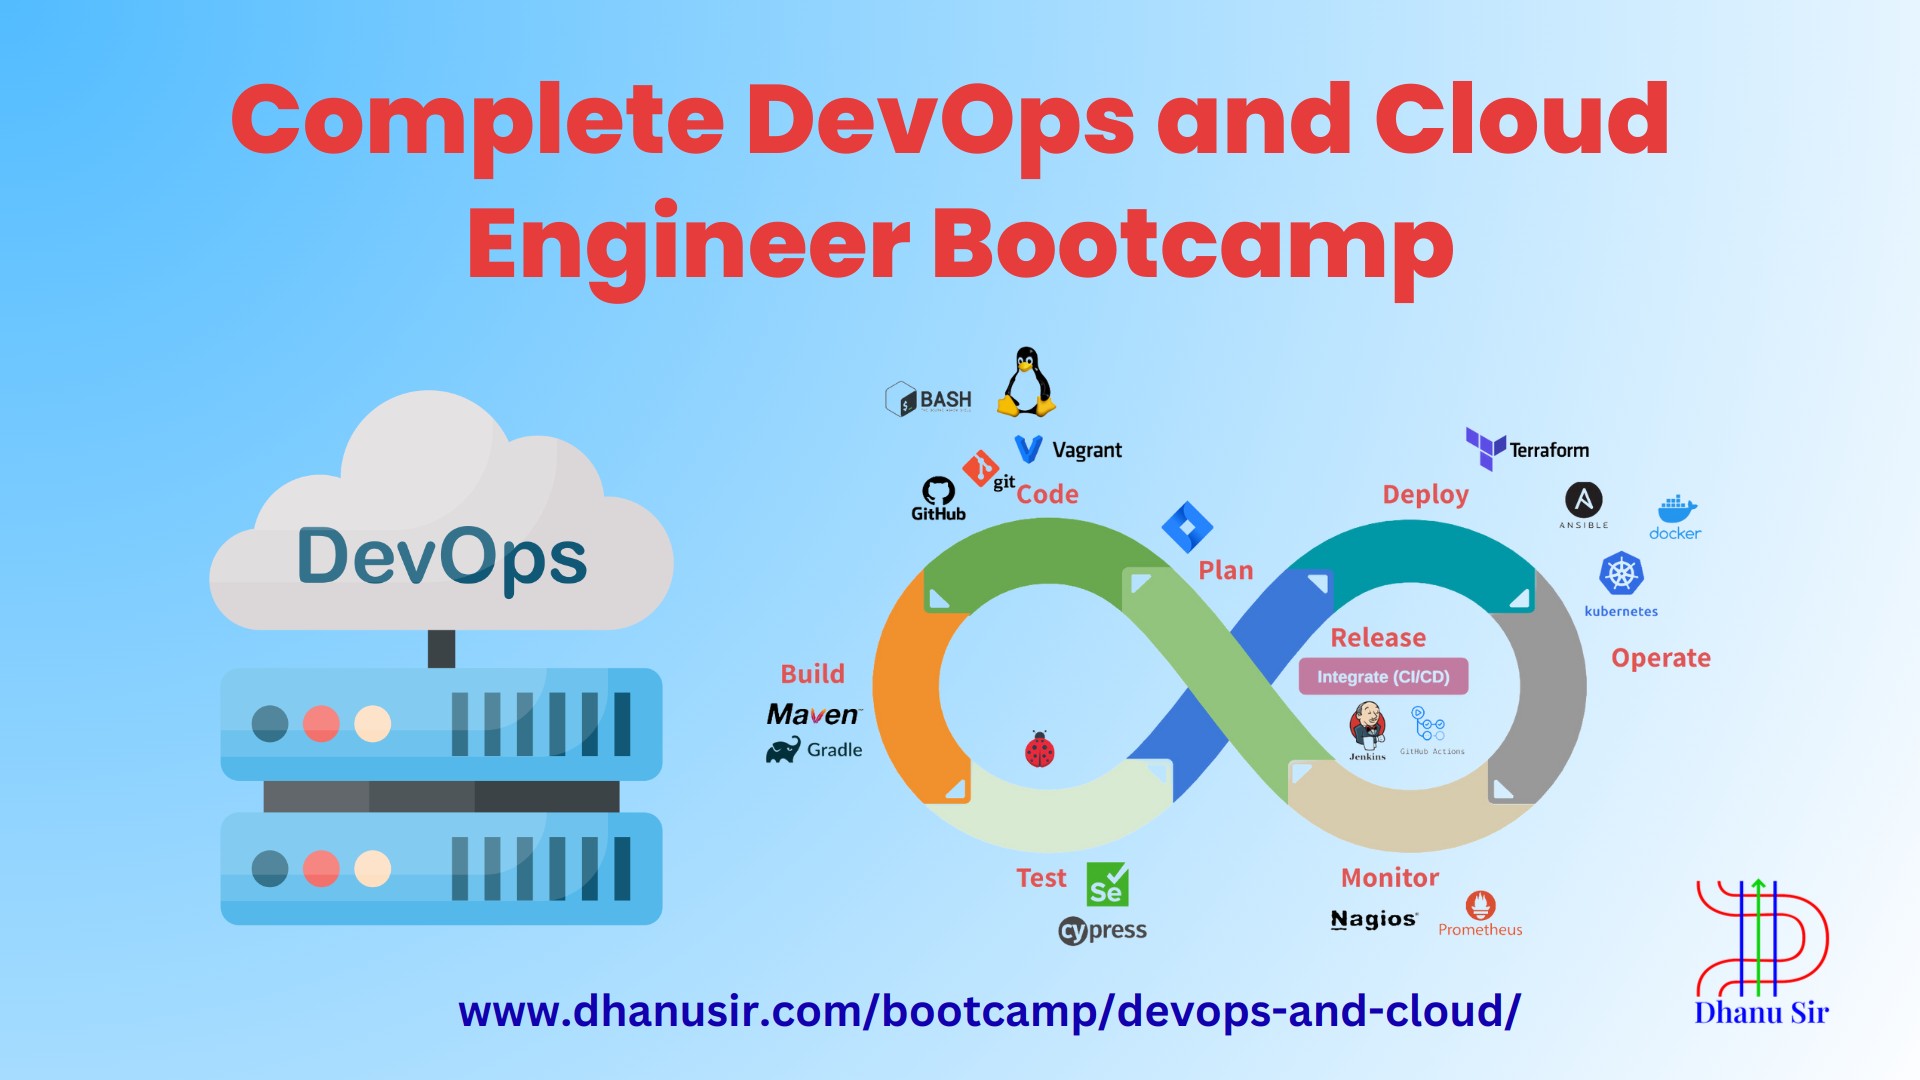 Complete DevOps and Cloud Engineer Bootcamp